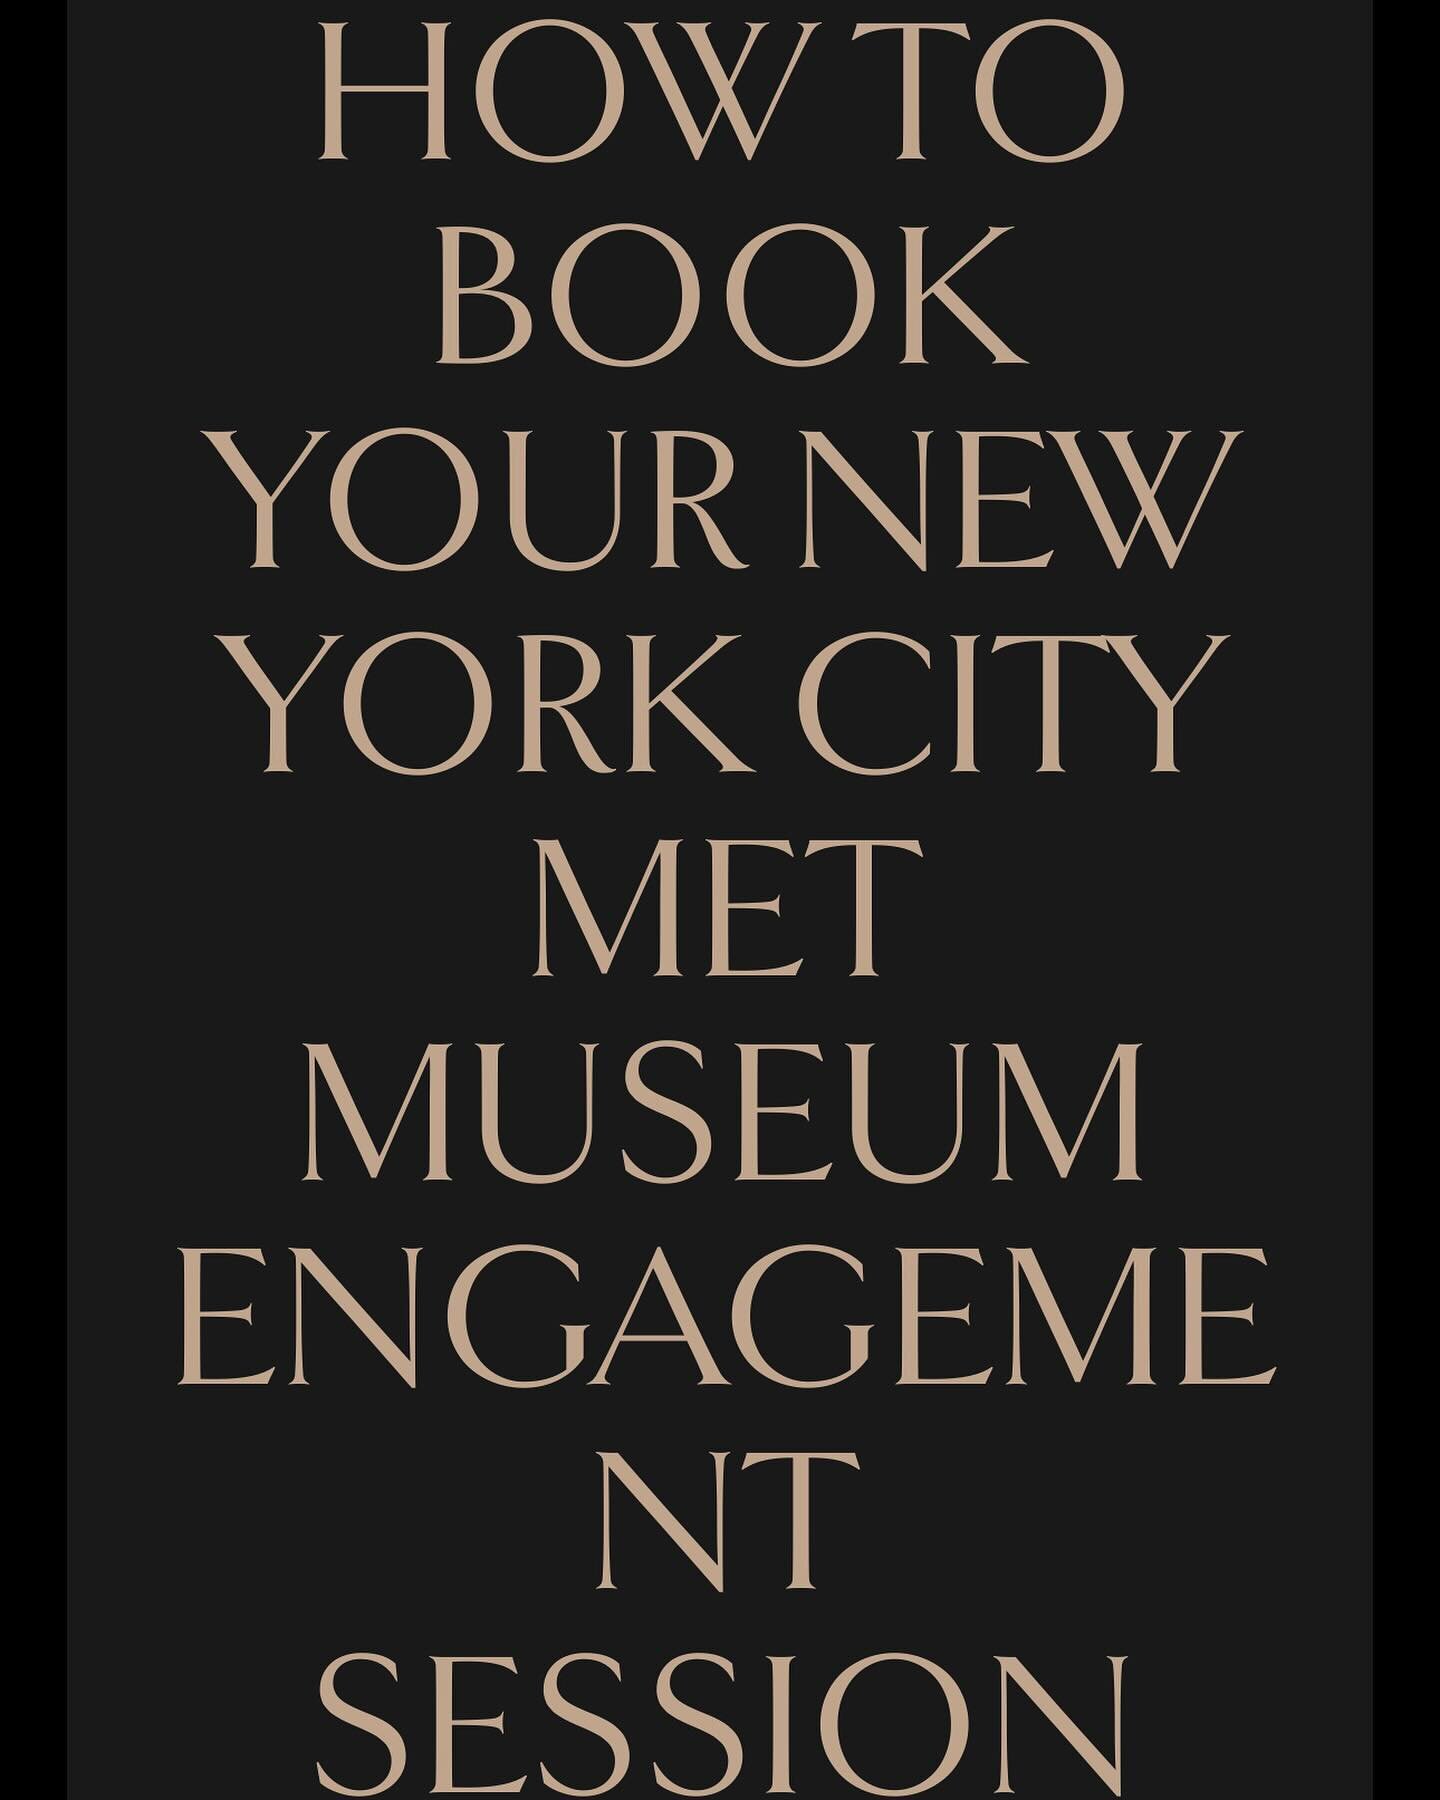 New blog post is up &amp; about &lsquo;How to book your New York City Met Museum engagement session&rsquo; link in my bio!

Share &amp; save this post with a friend who&rsquo;s been wanting to get their photos taken @metmuseum

Was this helpful? Lmk 